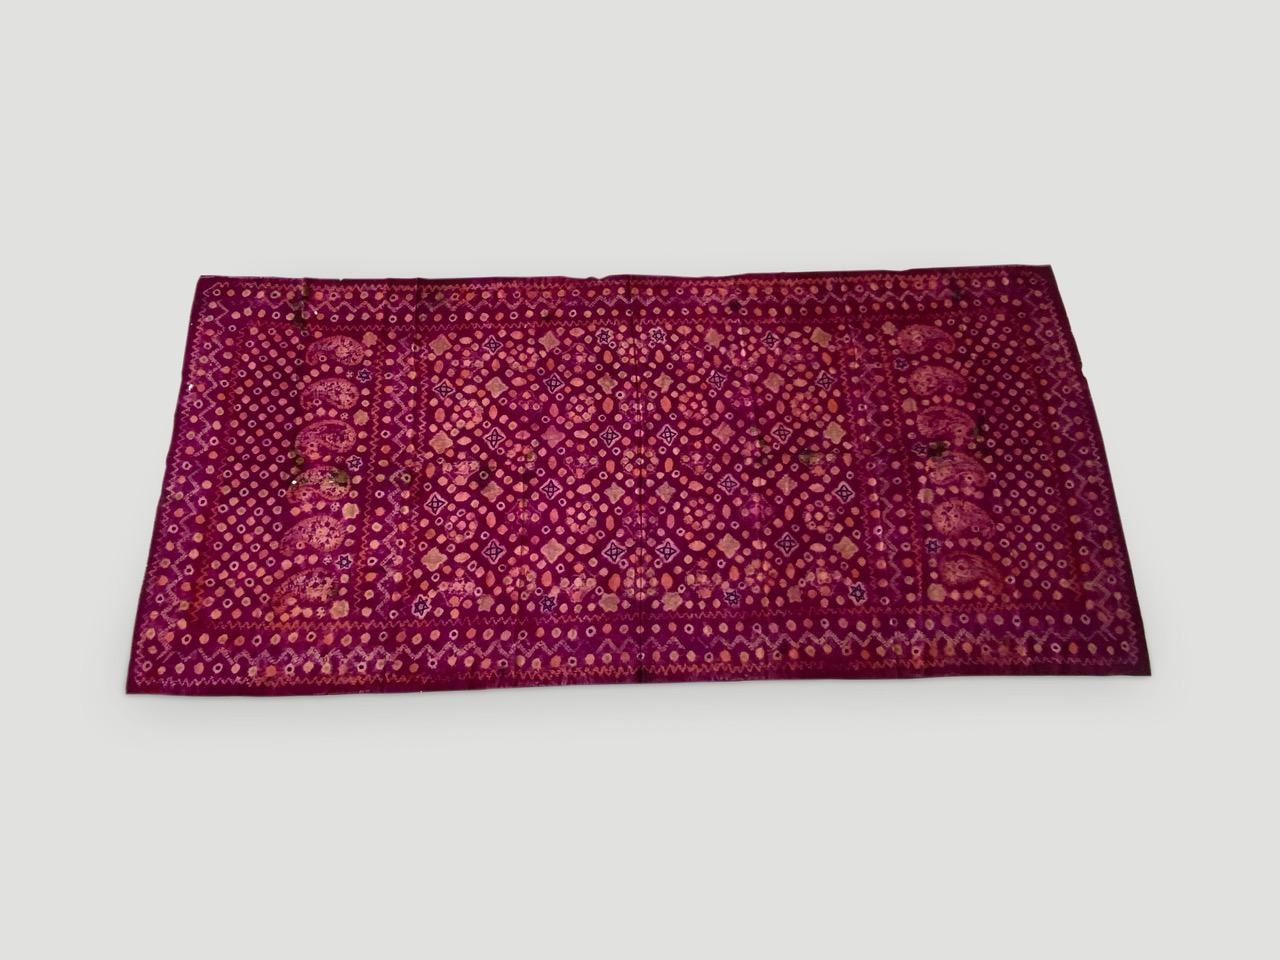 Stunning contrasting colors on this beautiful fine silk, tie dye ceremonial shoulder cloth from Palembang, Sumatra. Early 20 century.

This beautiful shawl can be worn or used as a wall hanging framed. We only source the best. 

Andrianna